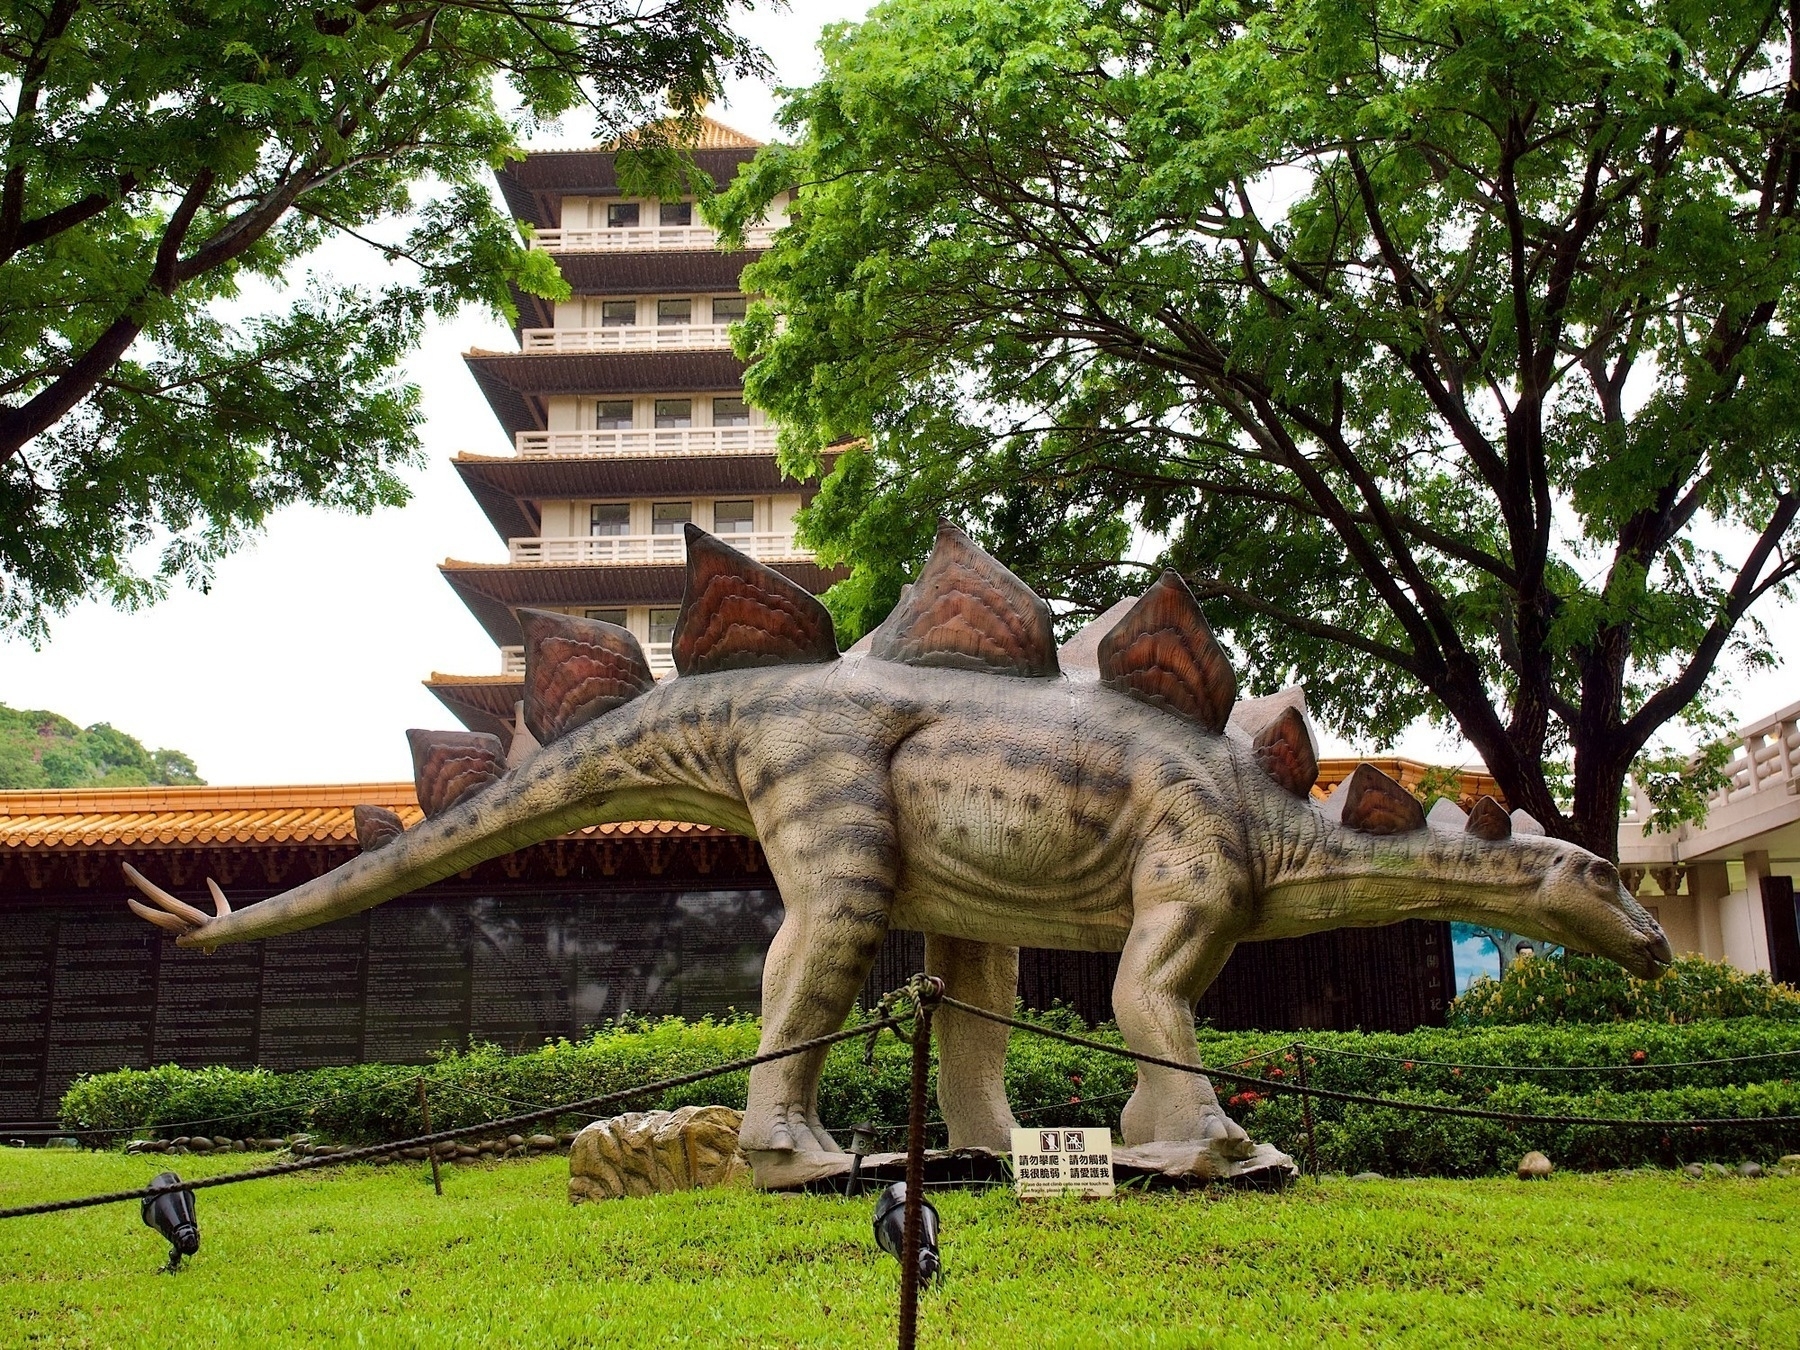 A stegasaurus statue in front of a Buddhist pagoda